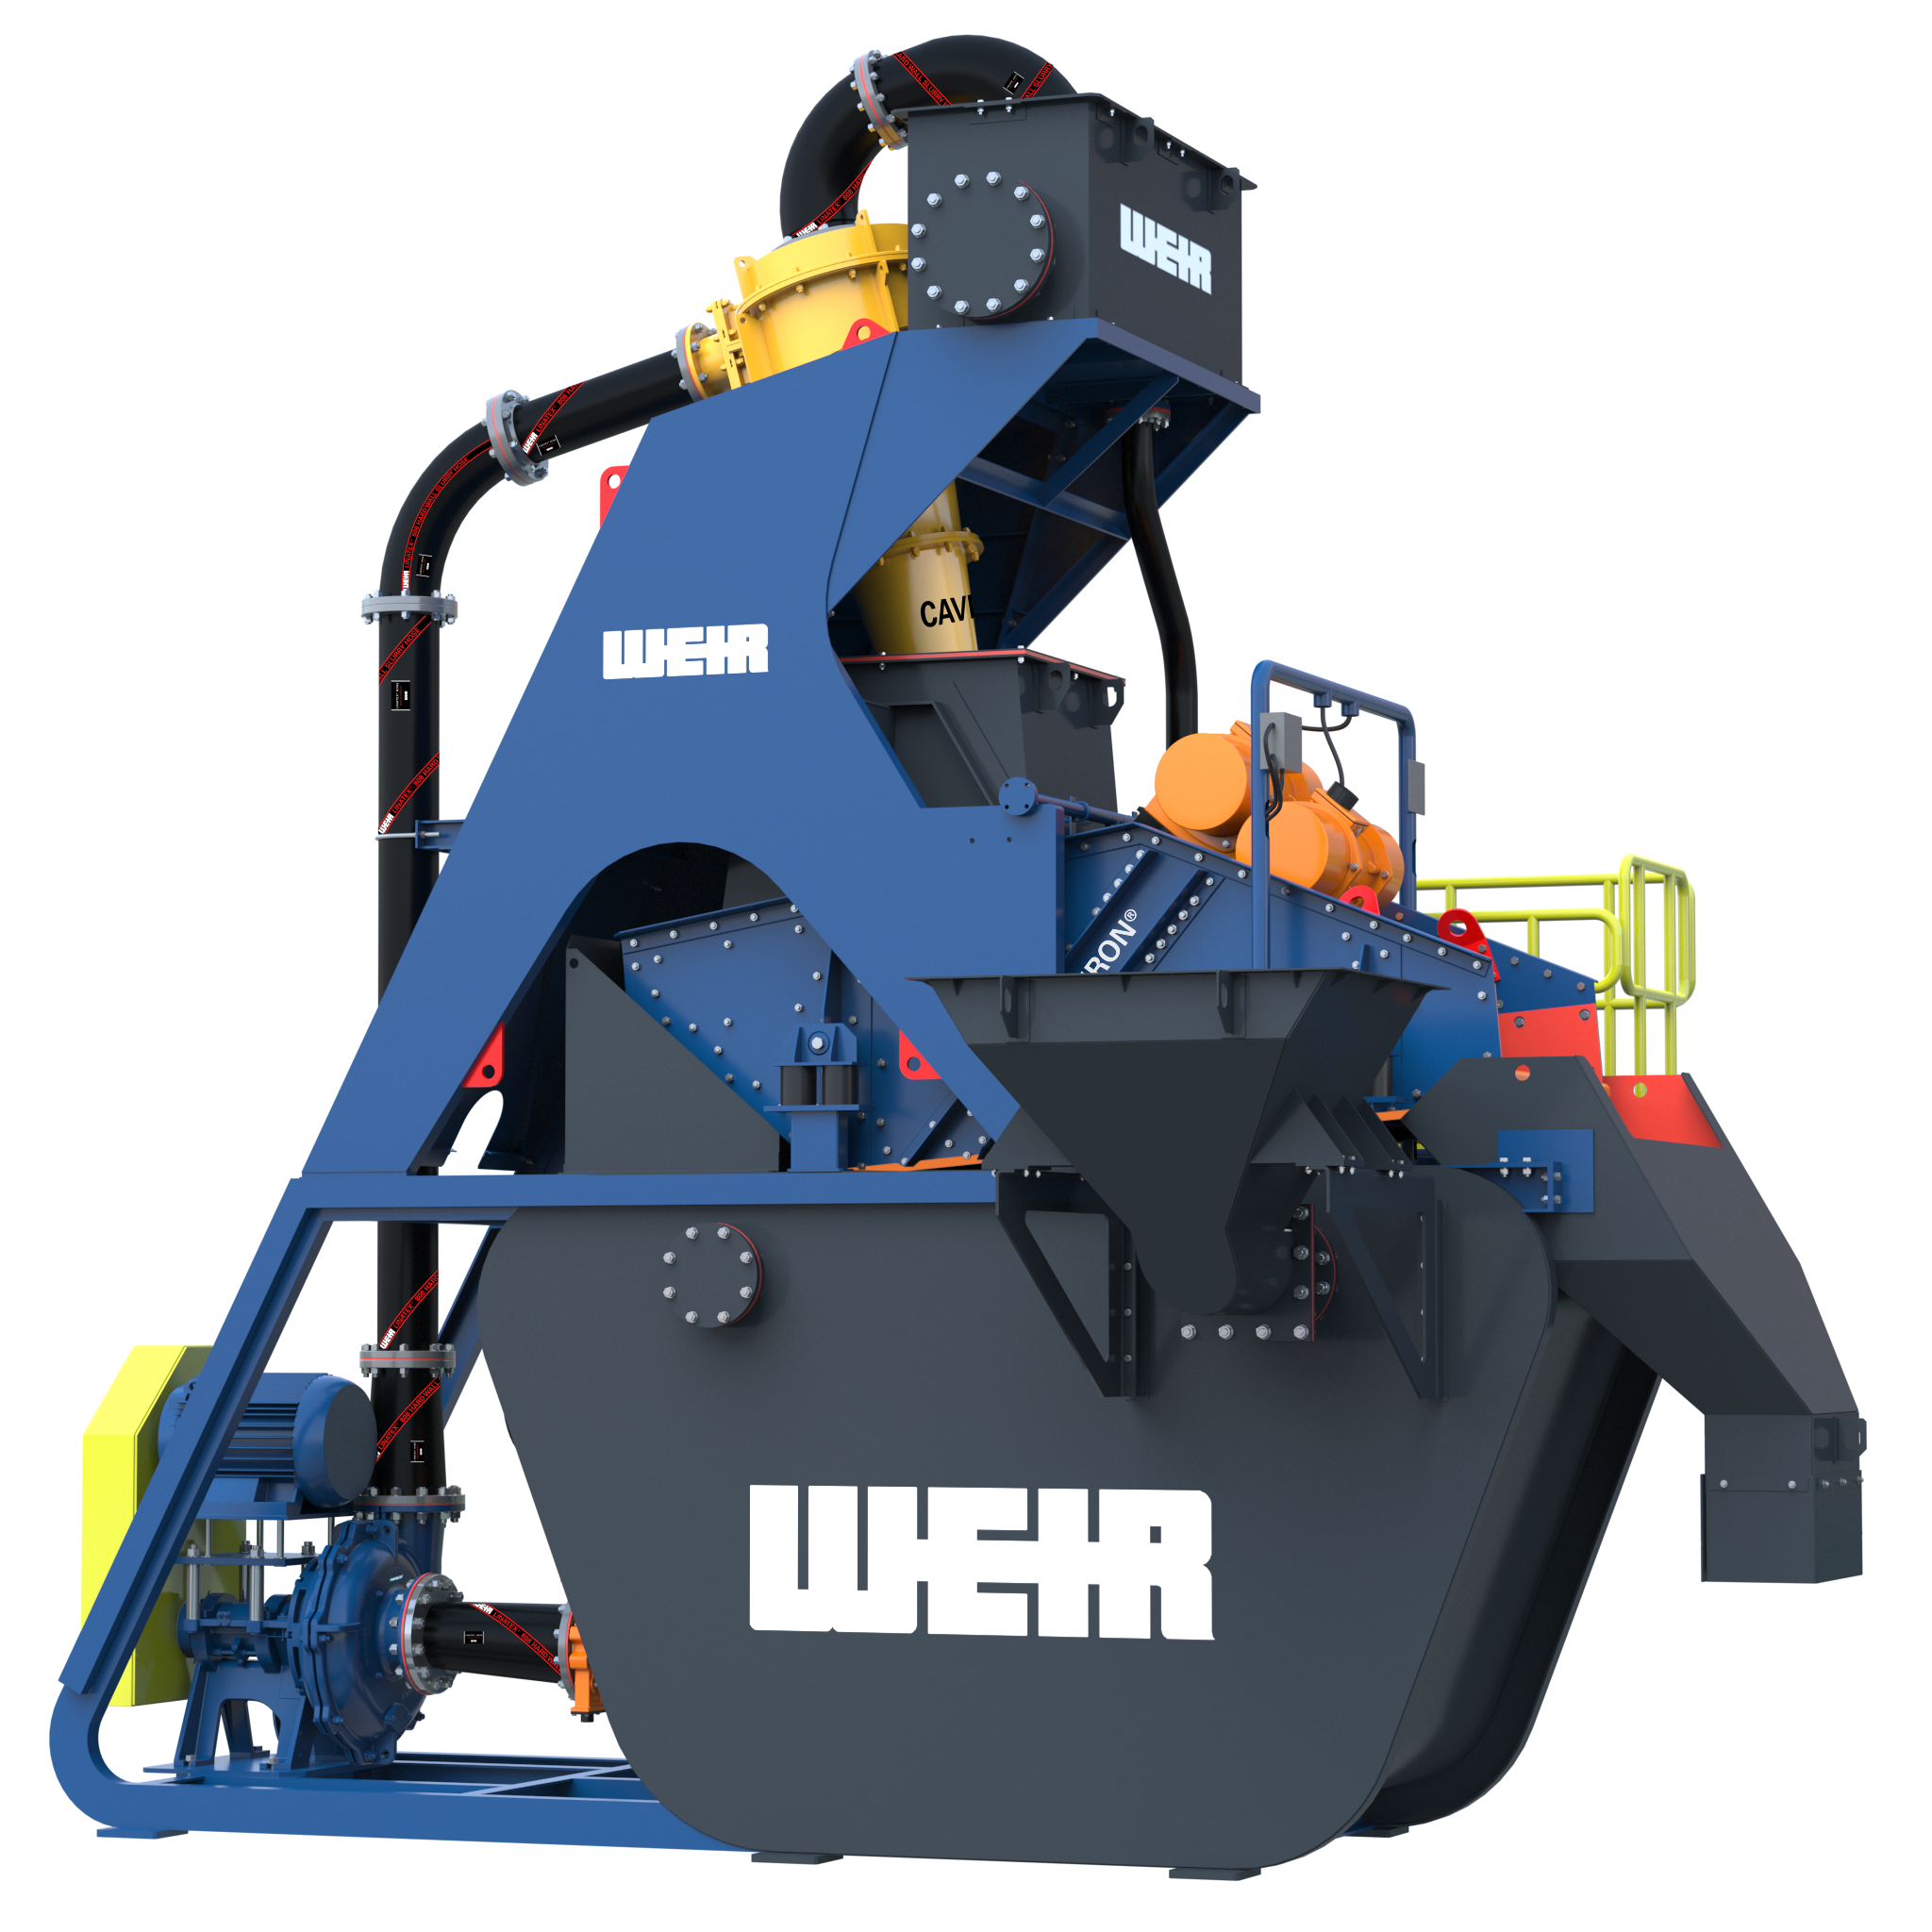 The plant features Warman WGR pumps, Cavex hydrocyclones, Enduron dewatering screens, Linatex hoses and Isogate knife gate valves.